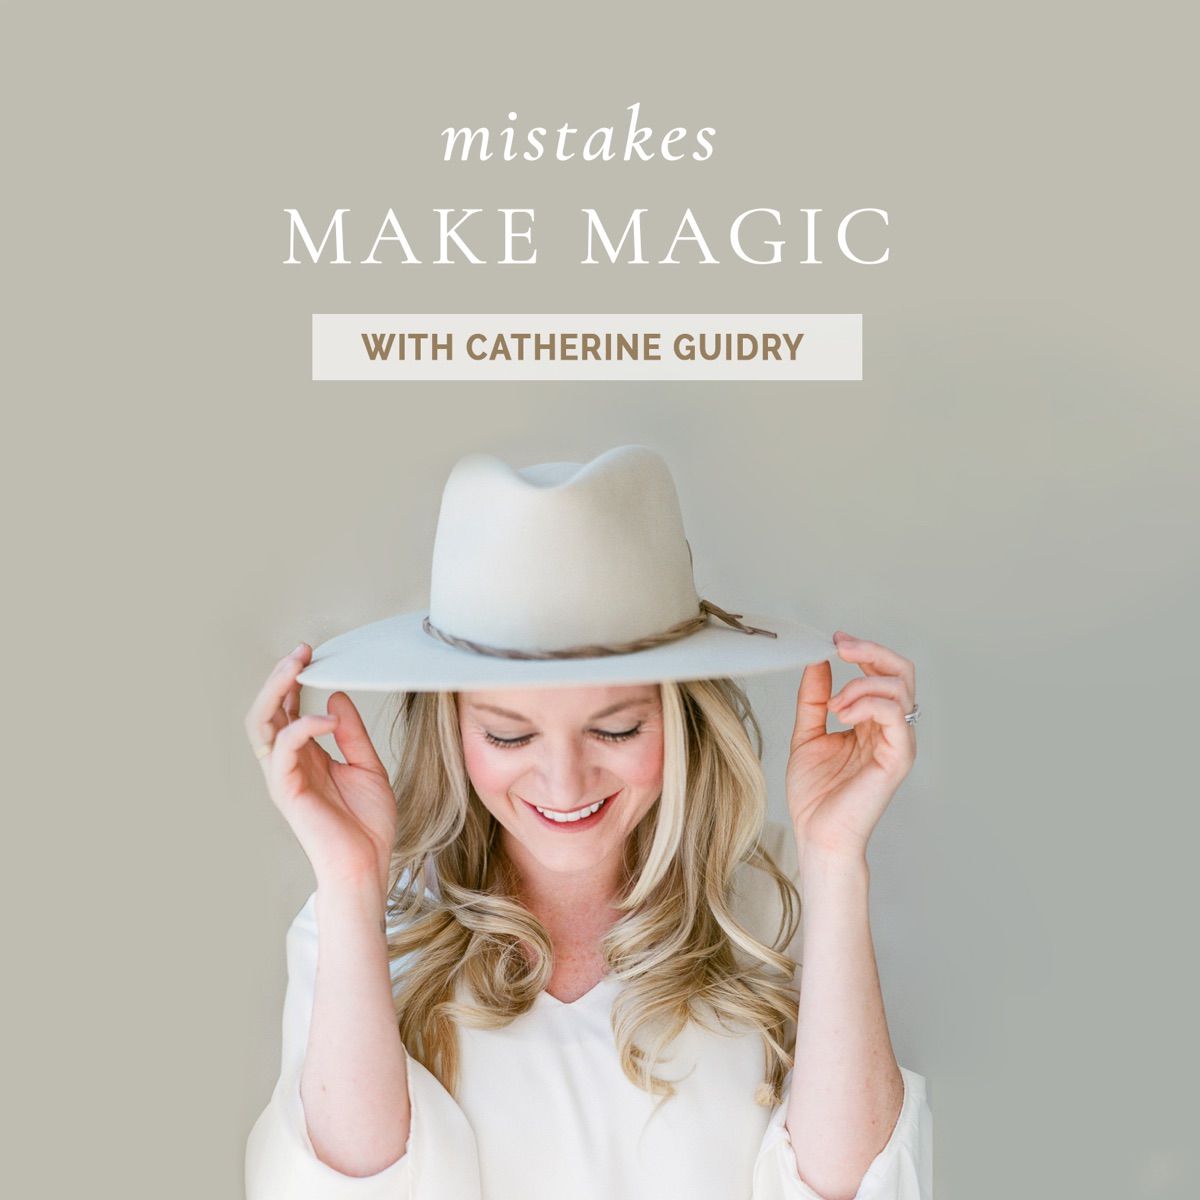 Mistakes Make Magic with Catherine Guidry